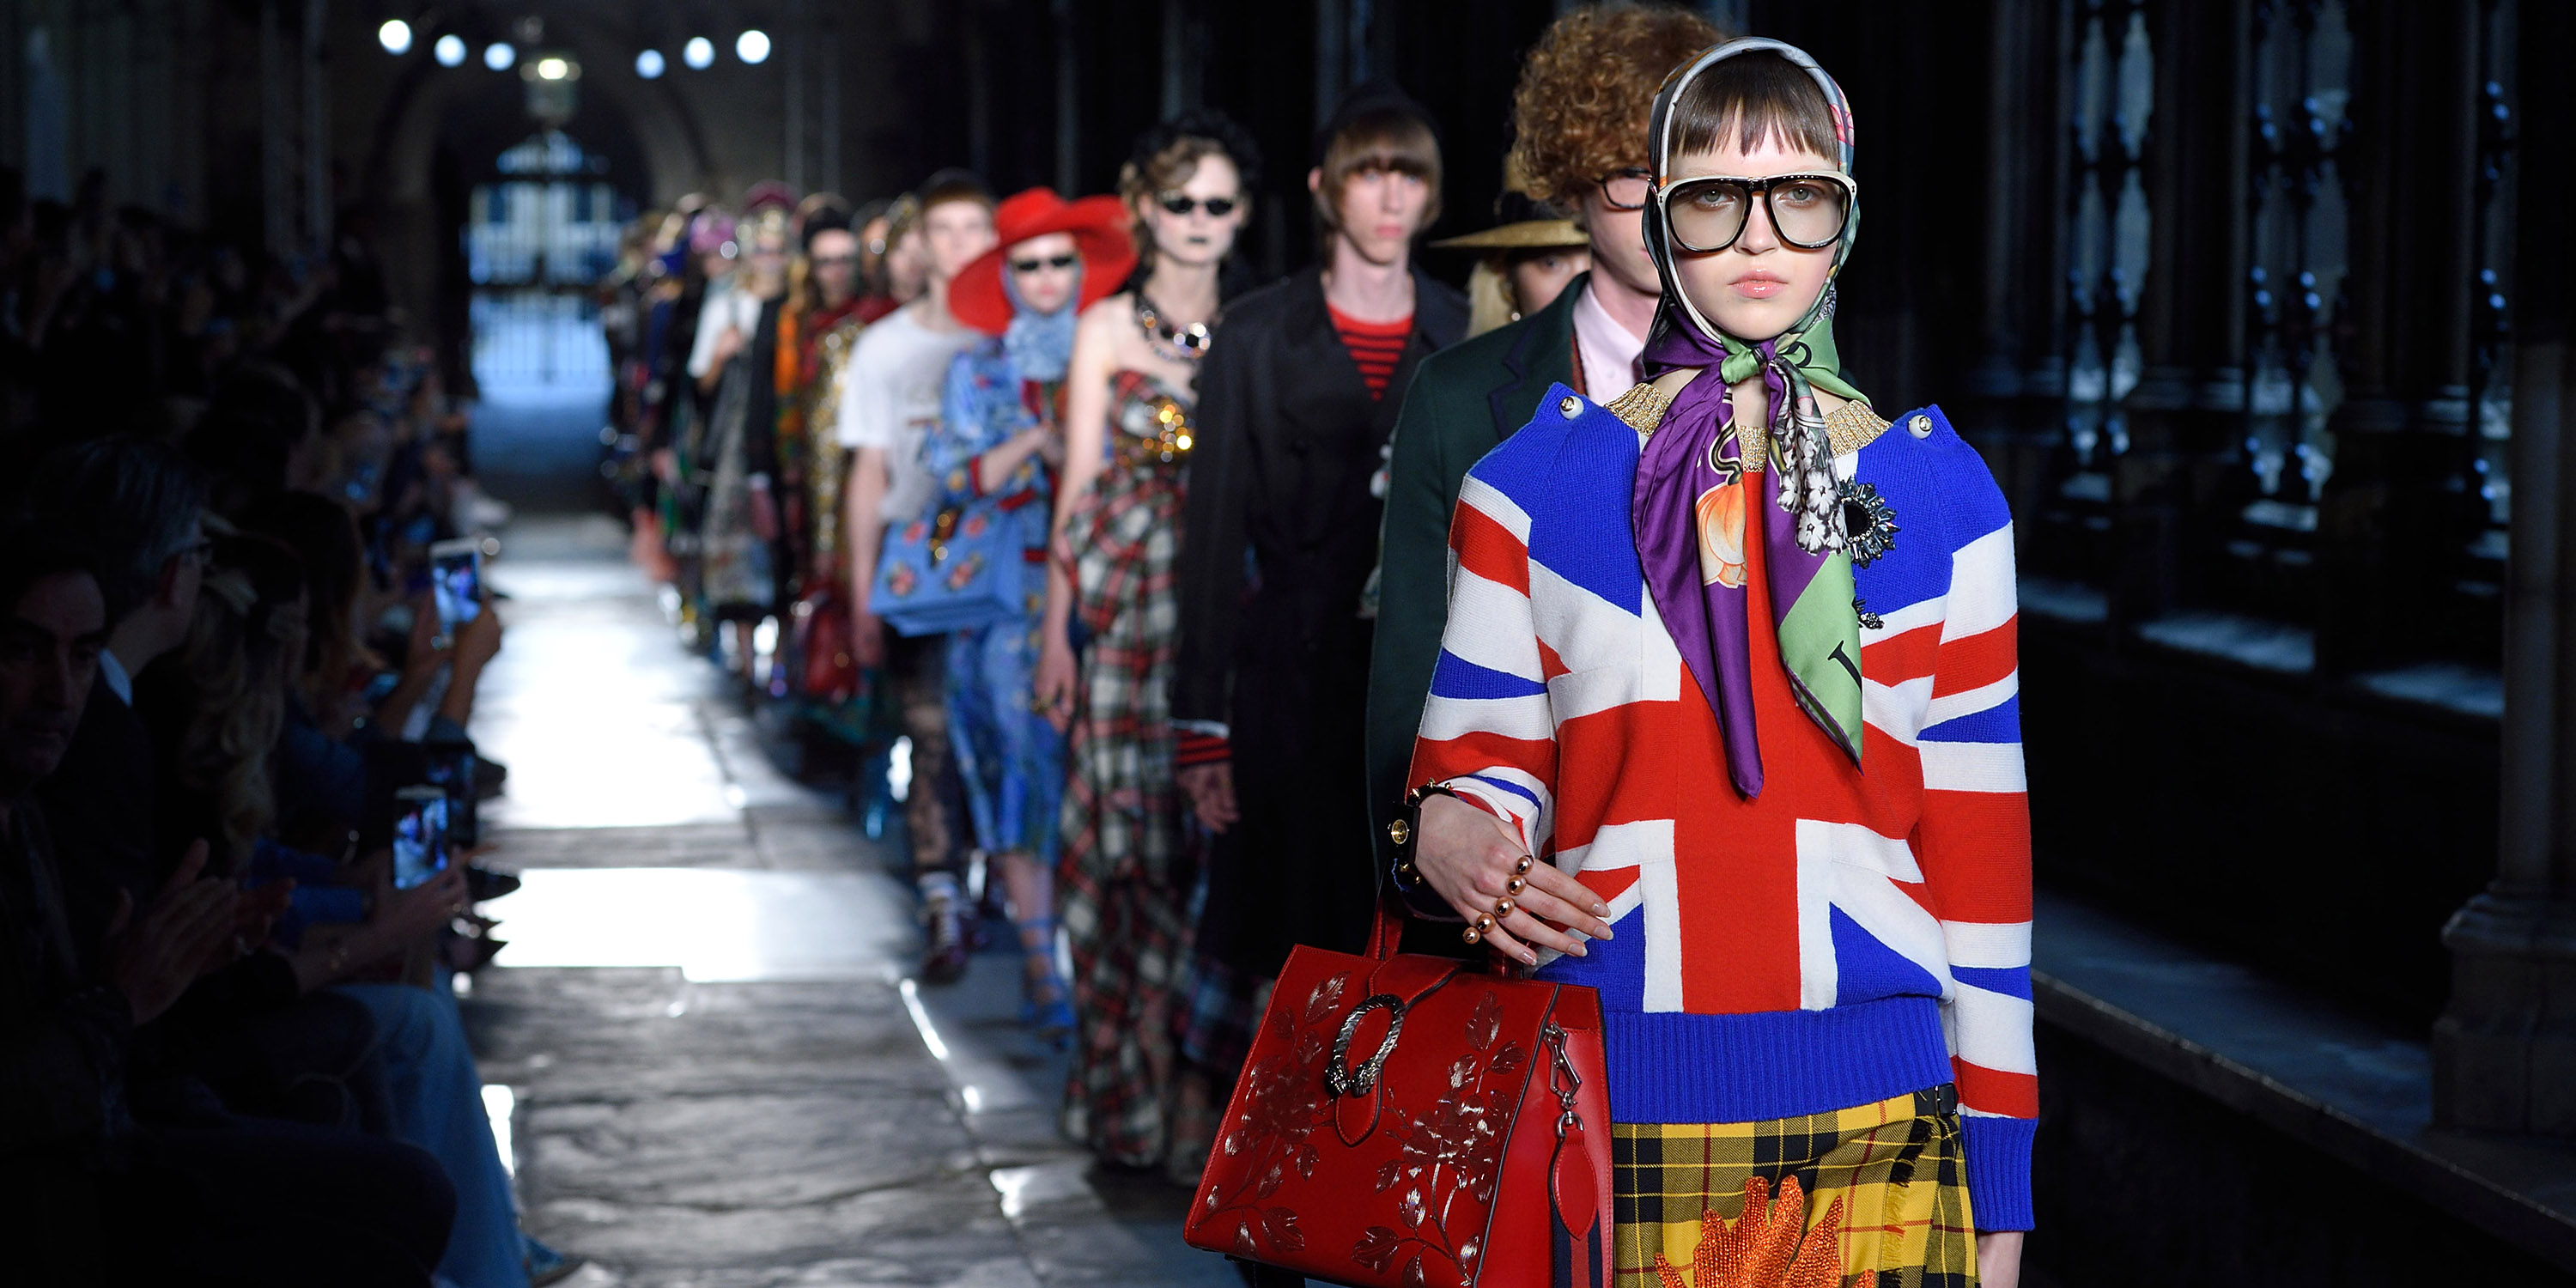 Gucci’s Cruise 2019 Show Sets Sail for Arles, France